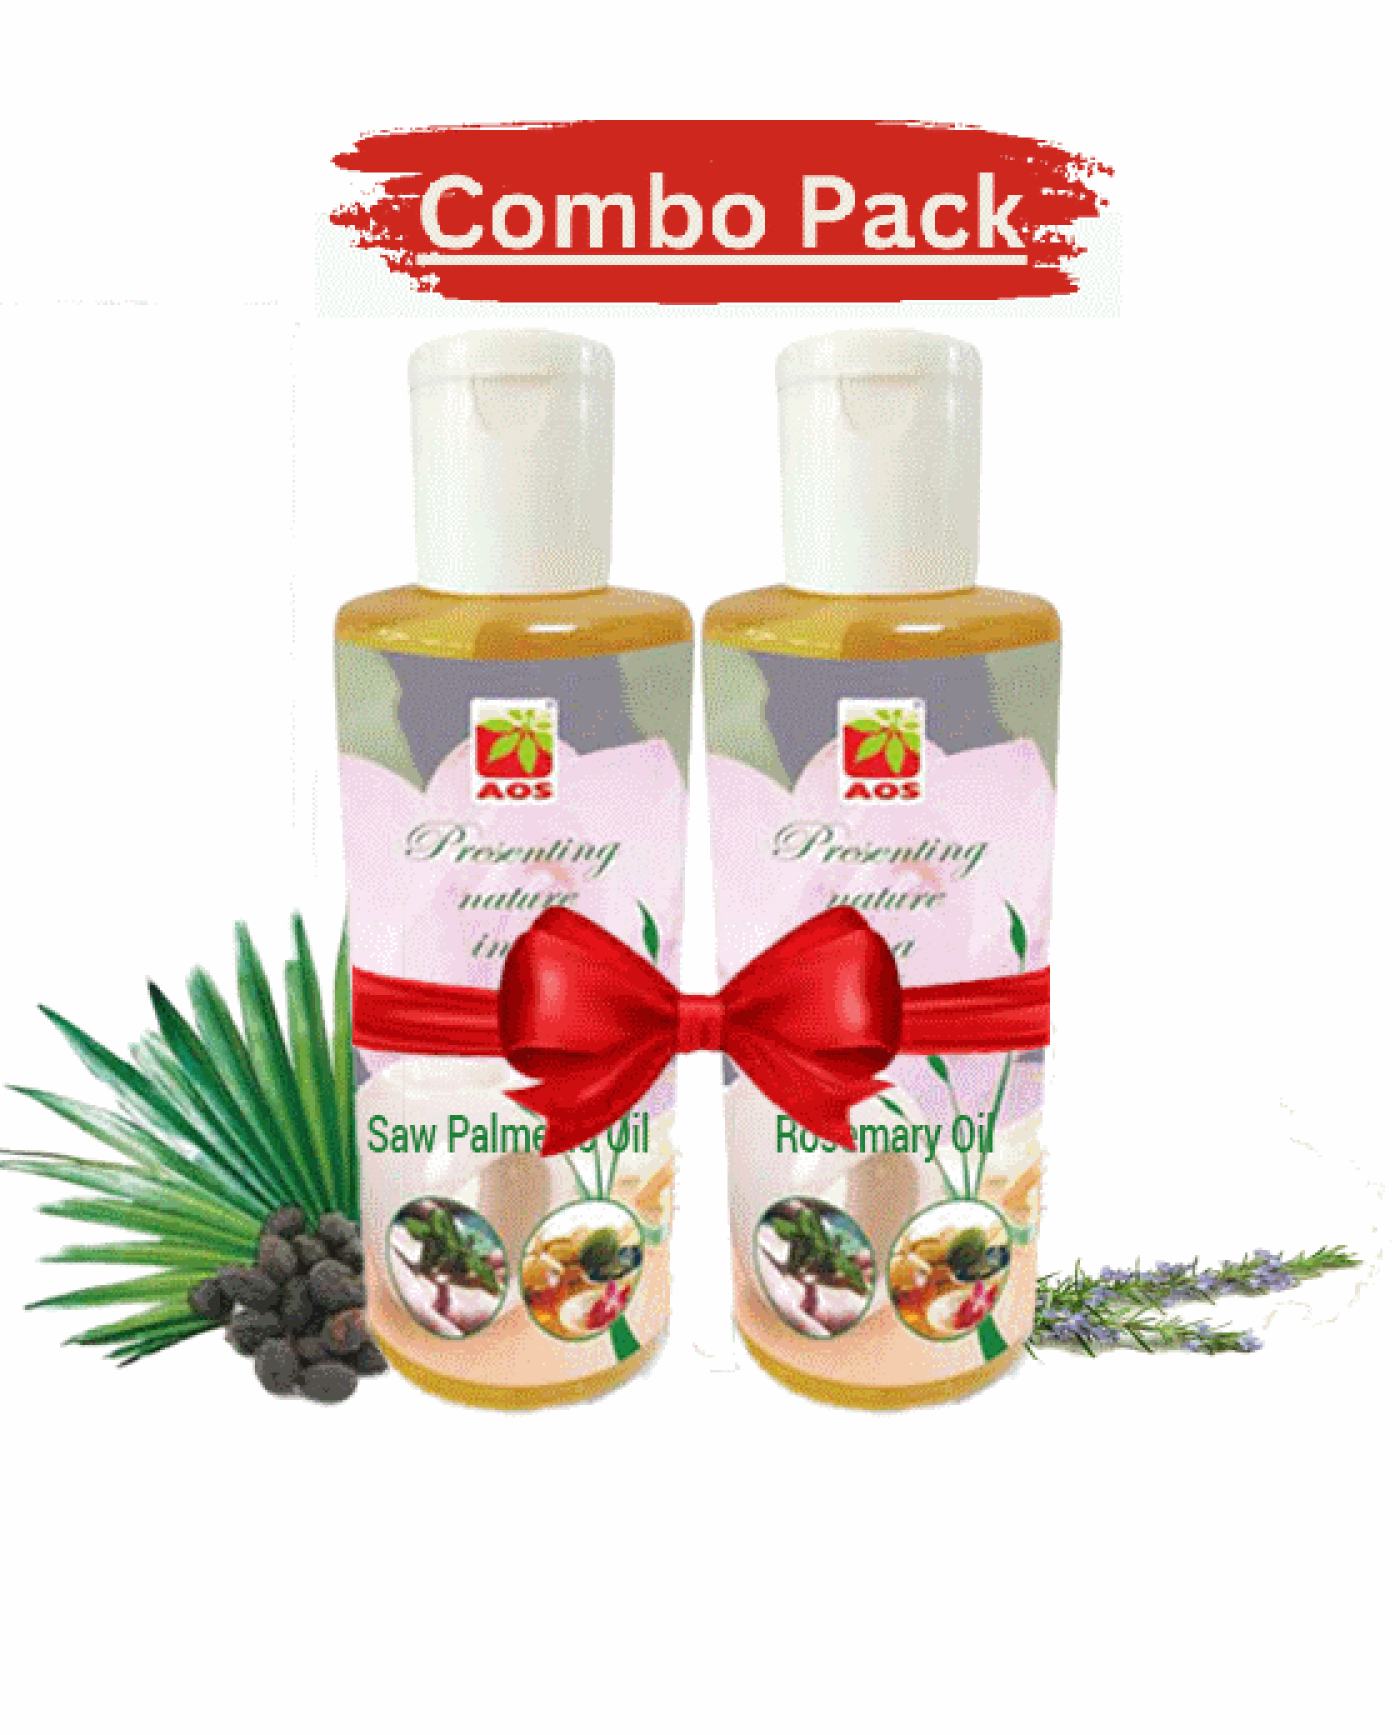 Combo Pack Saw Palmetto Oil and Rosemary Oil